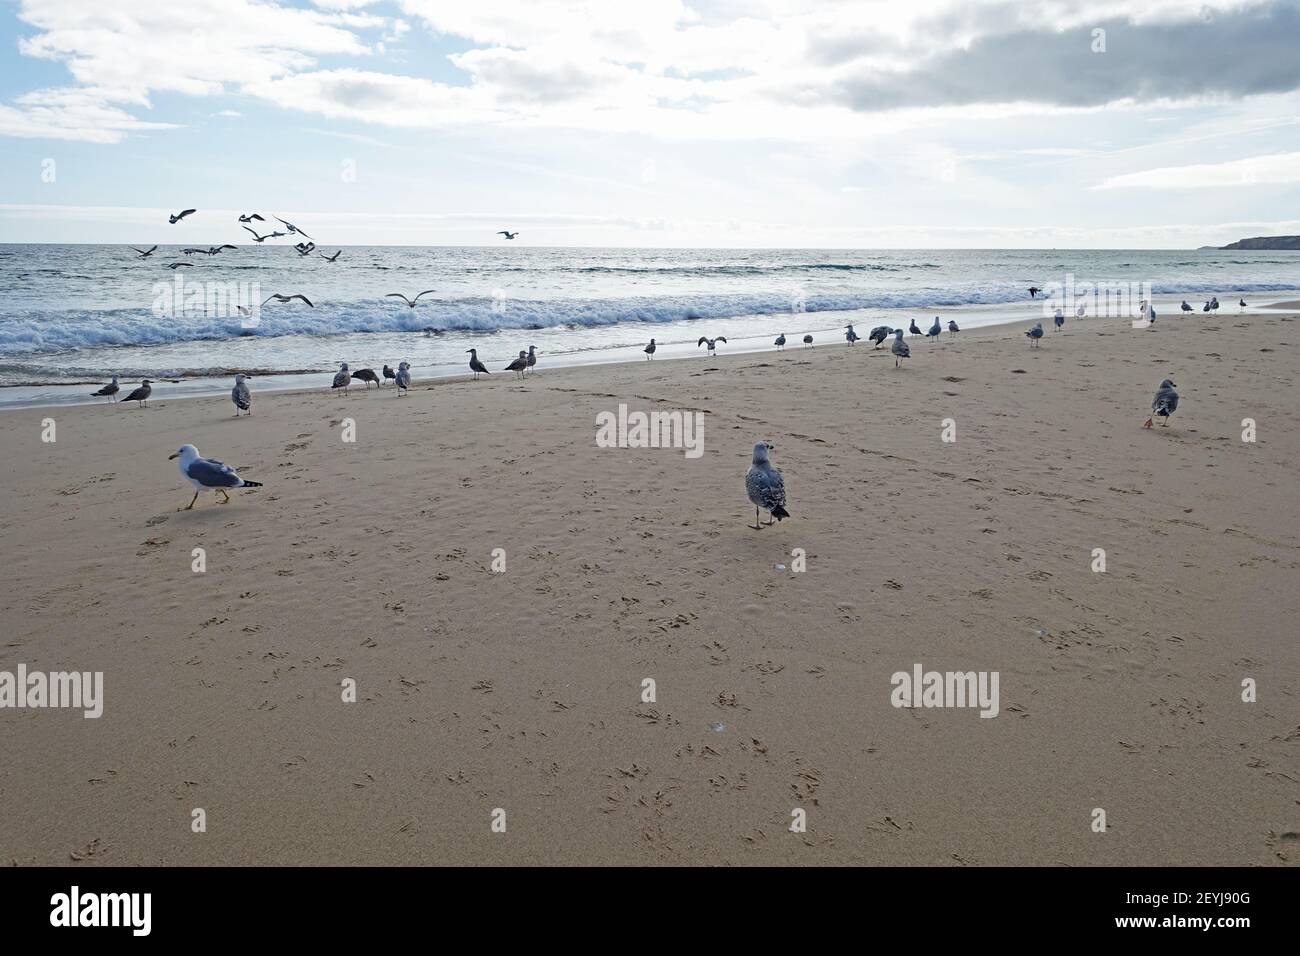 Lots of seaguls on a sandy beach in winter Stock Photo